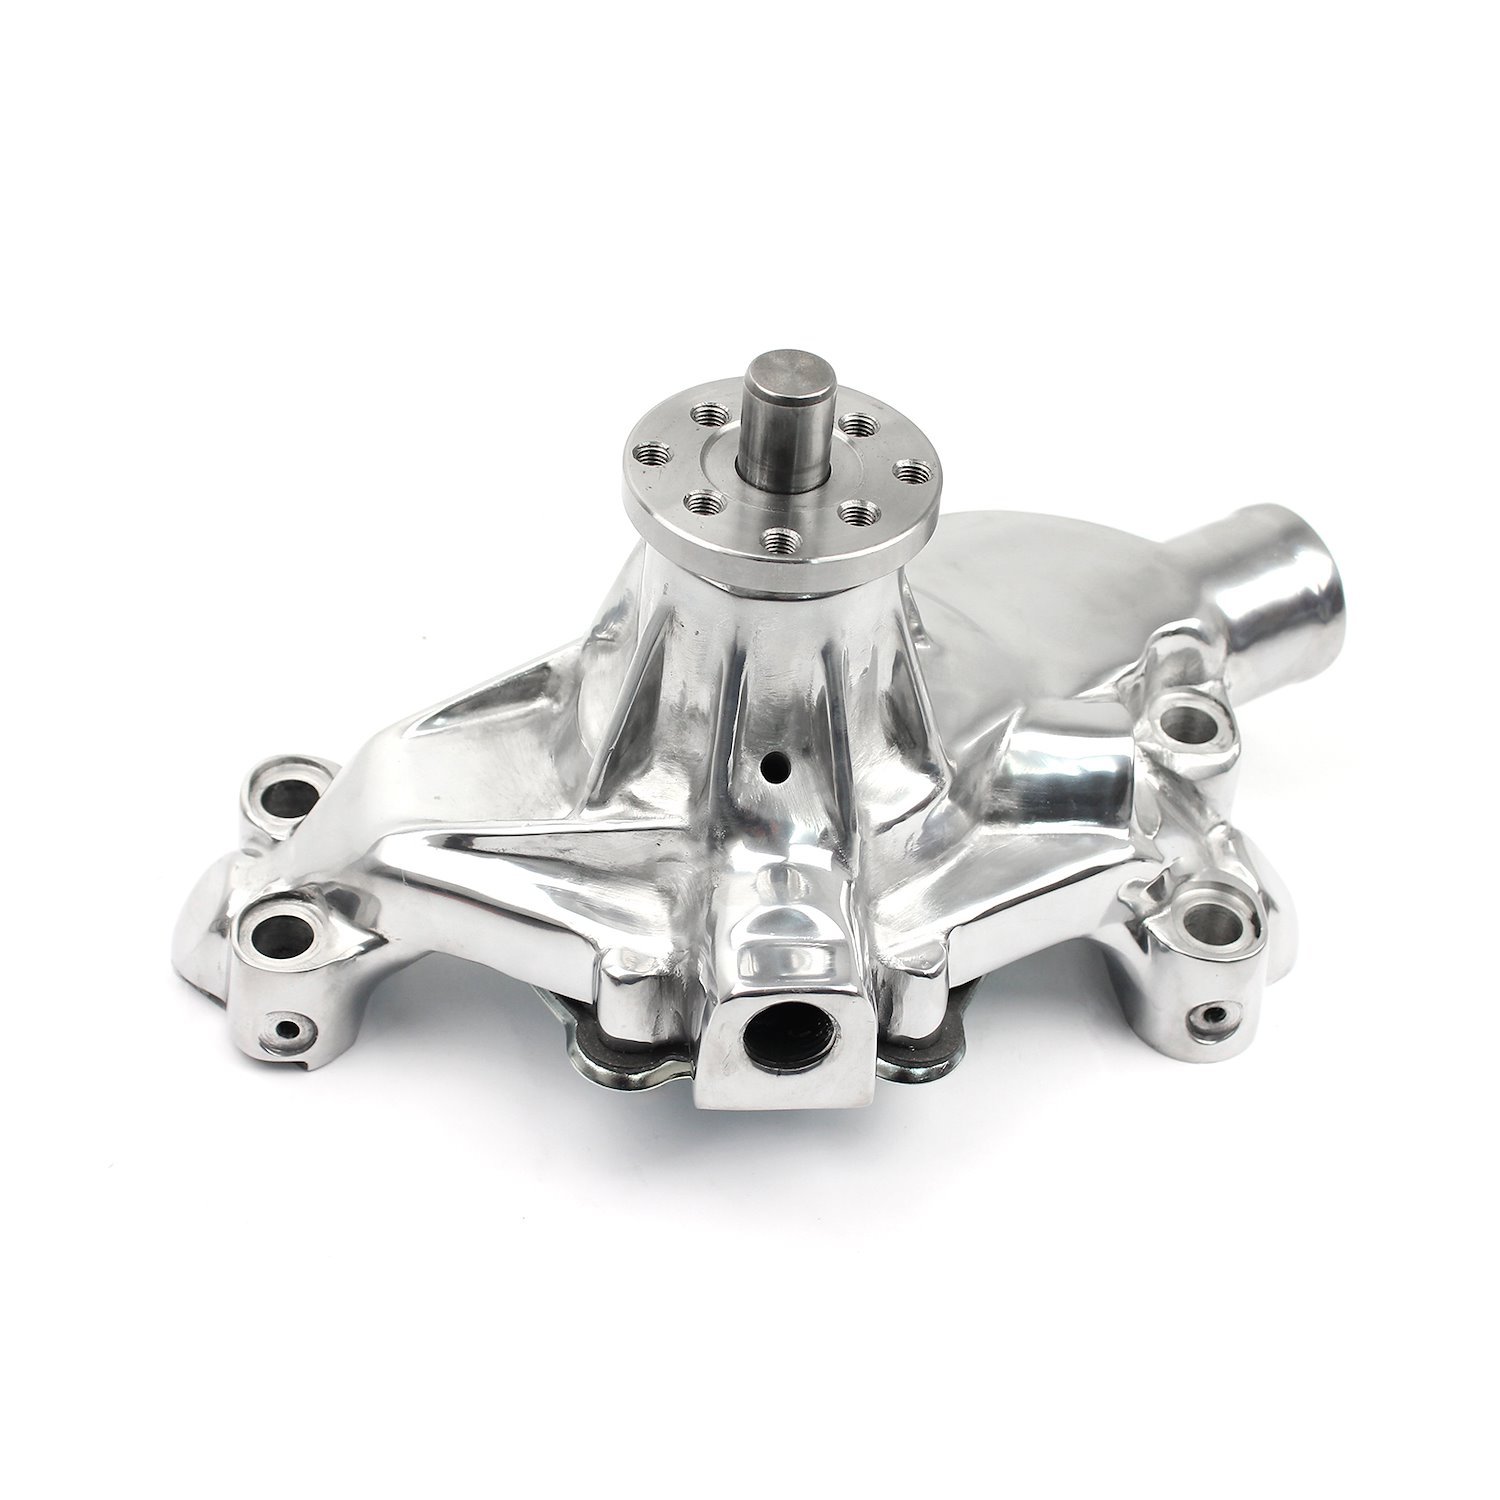 Aluminum Mechanical Water Pump Small Block Chevy 350, High-Volume - Polished Finish